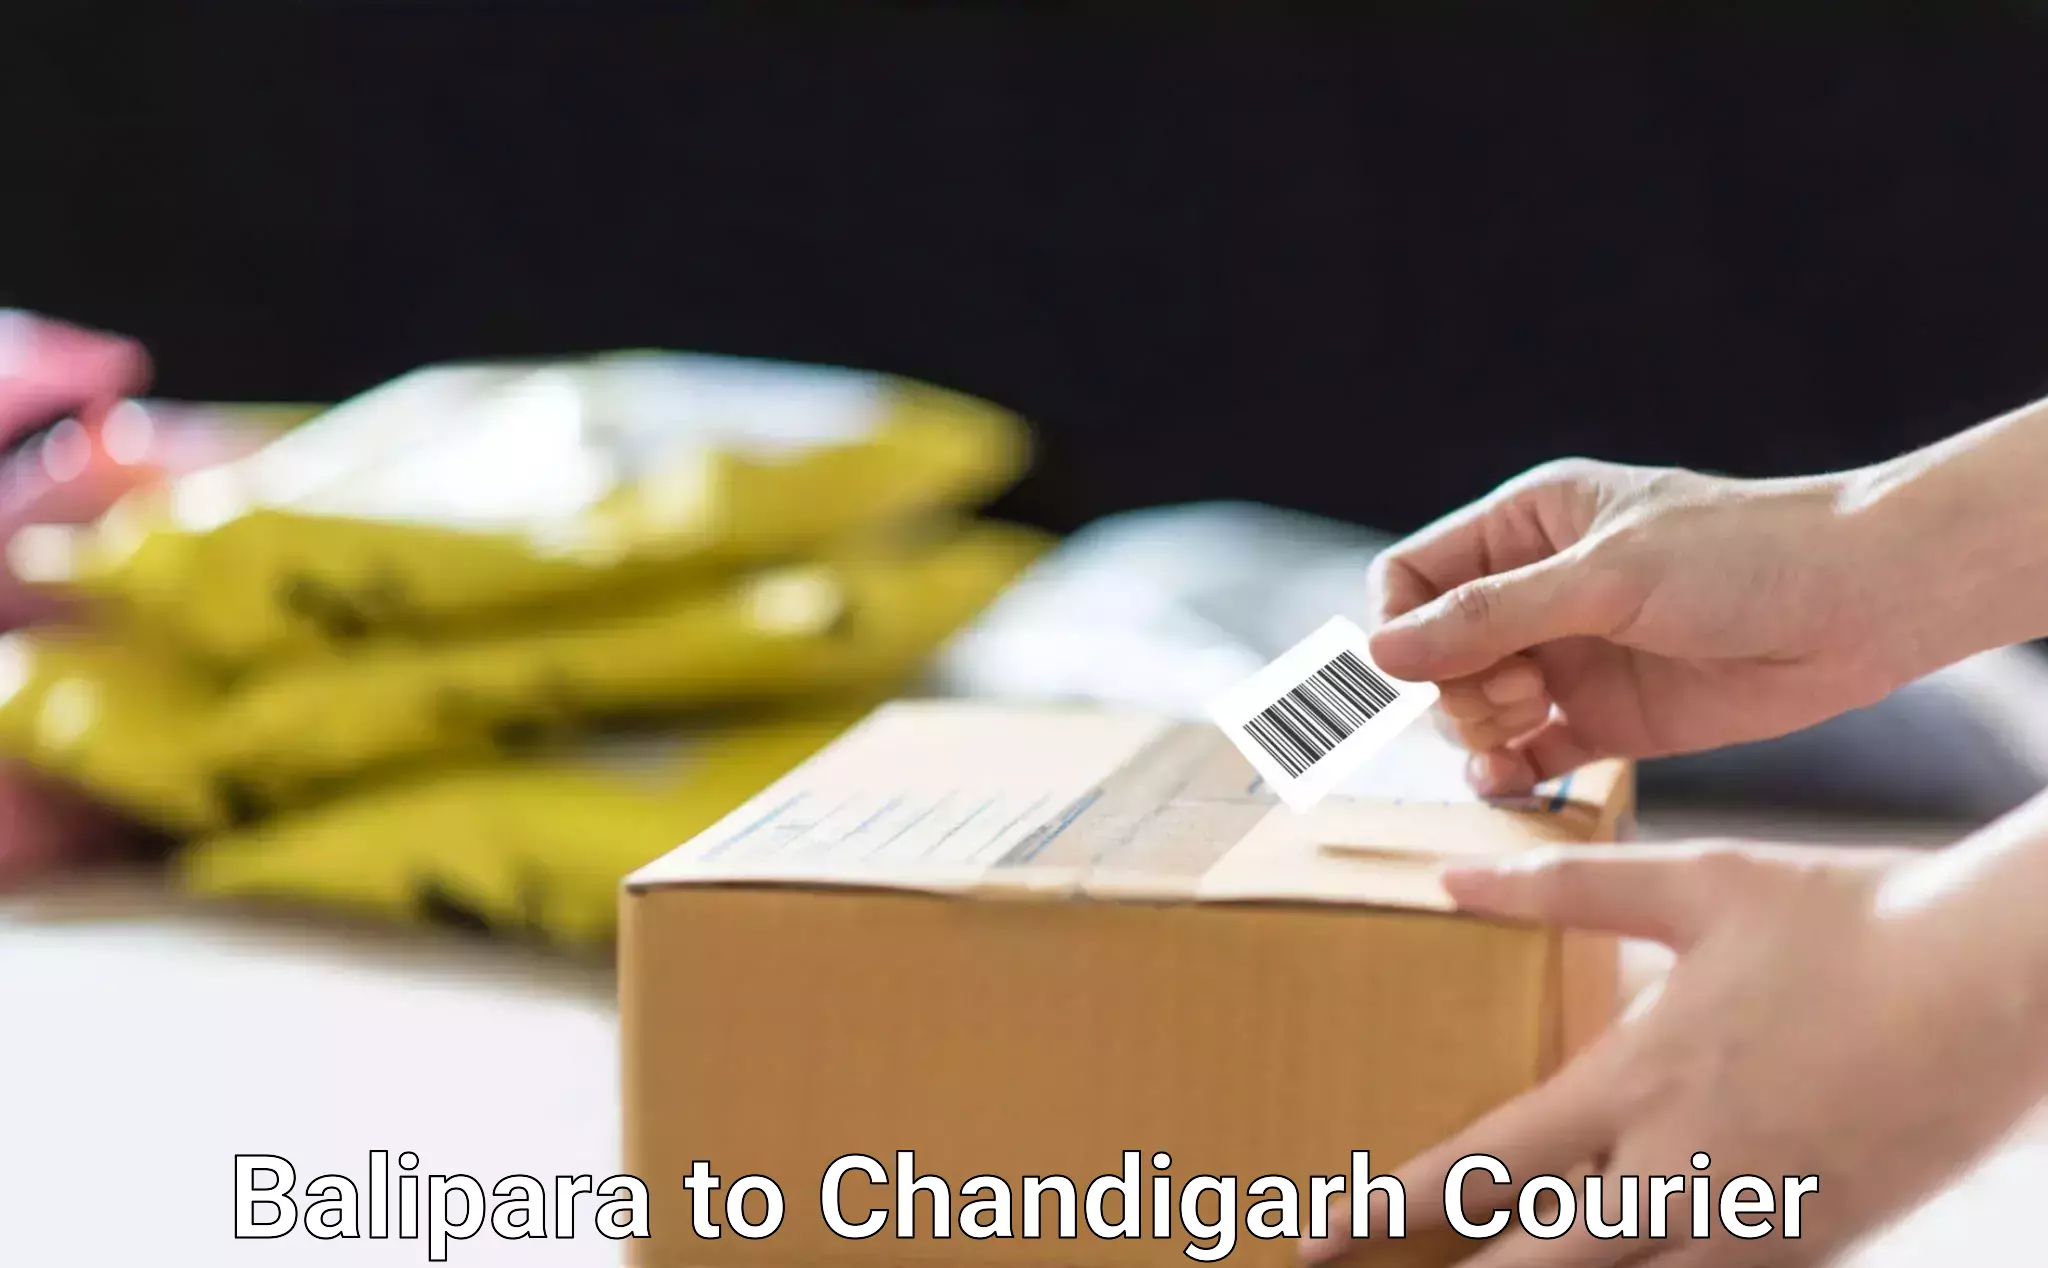 Parcel service for businesses Balipara to Chandigarh